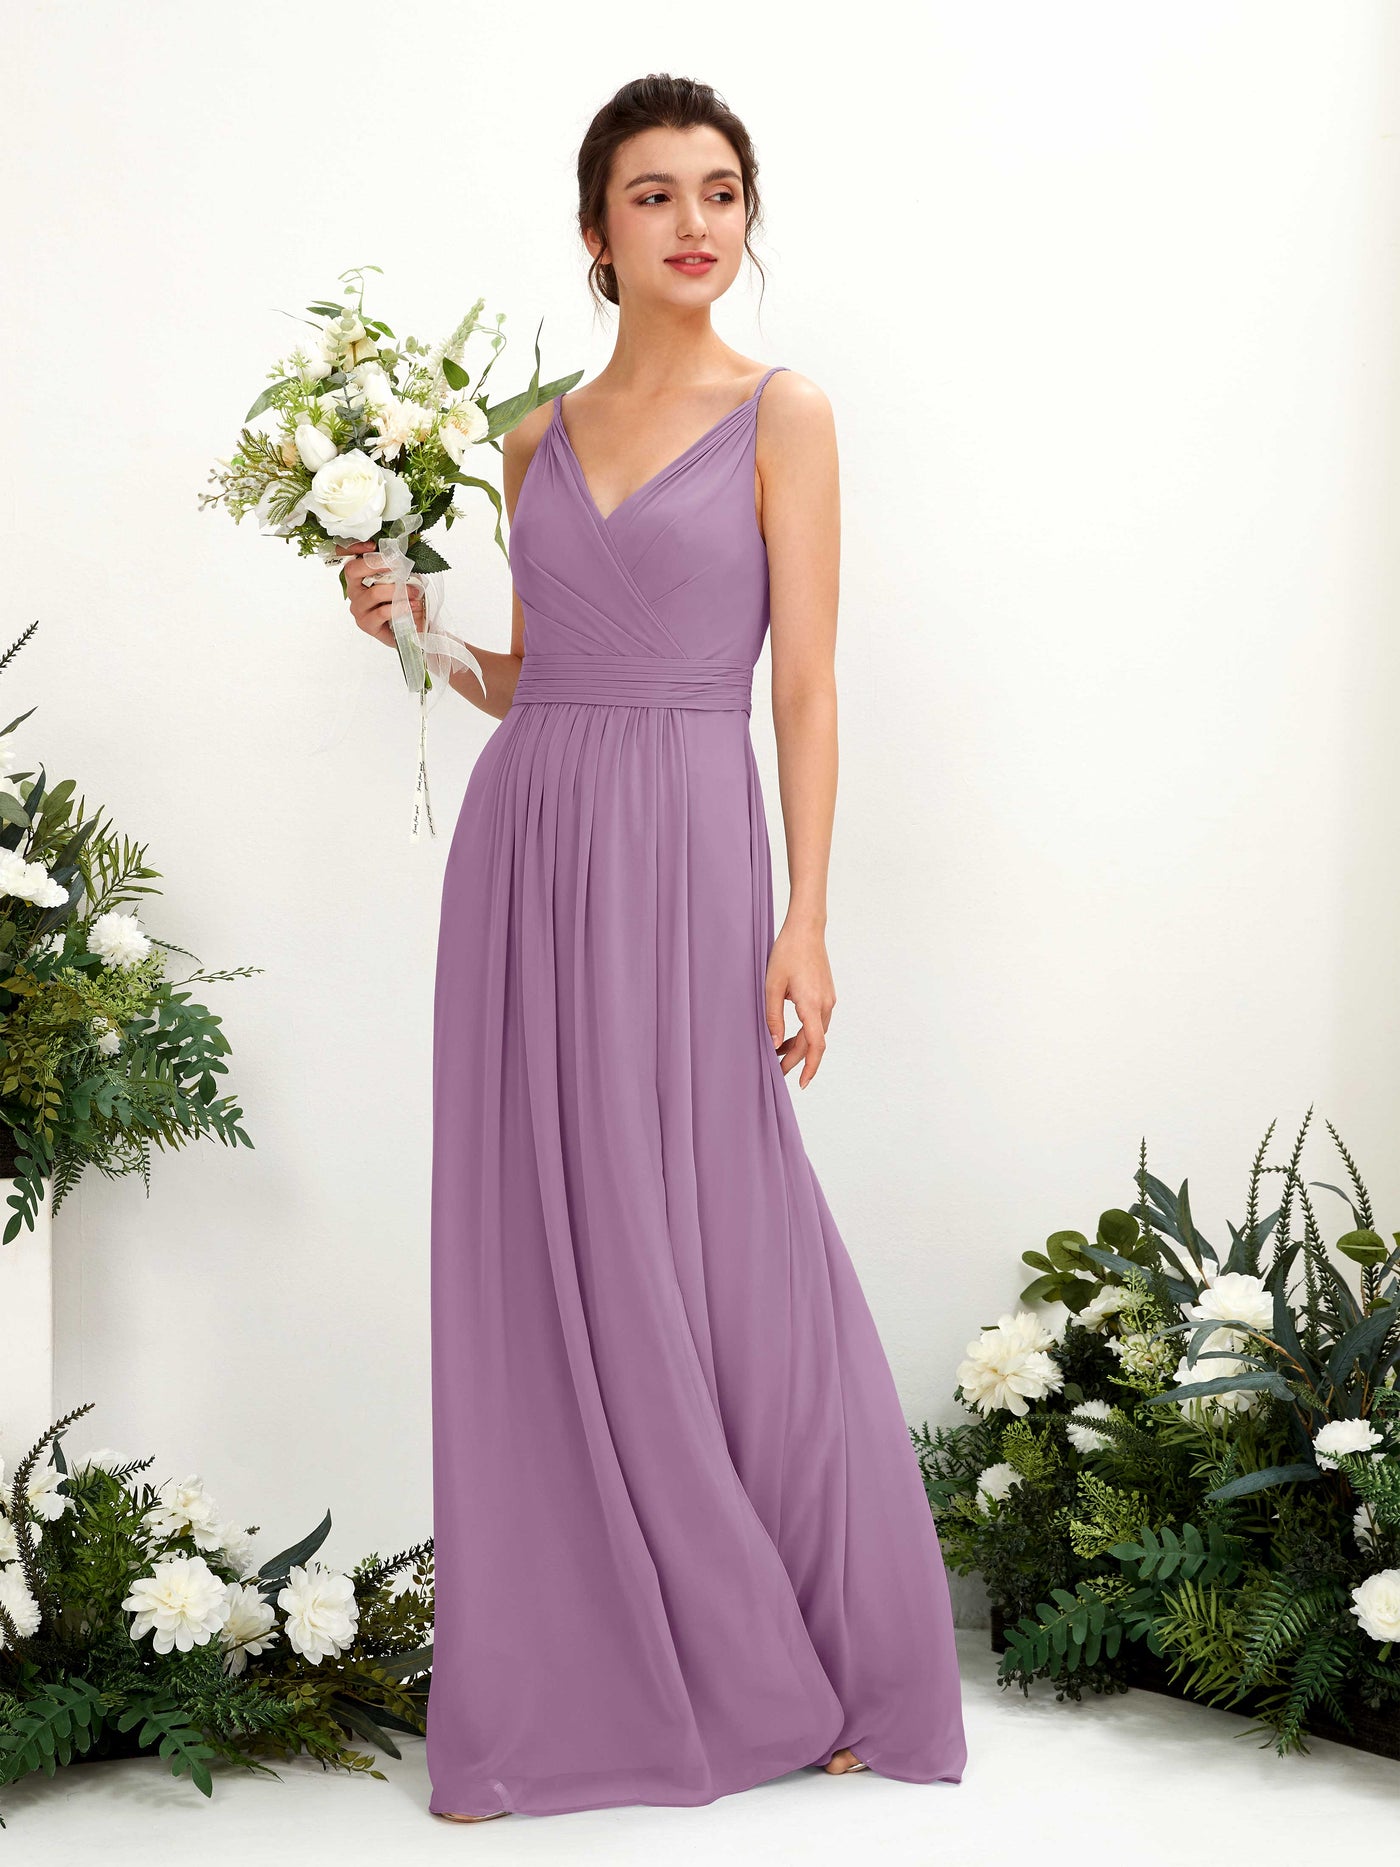 Orchid Mist Bridesmaid Dresses Bridesmaid Dress A-line Chiffon Spaghetti-straps Full Length Sleeveless Wedding Party Dress (81223921)#color_orchid-mist